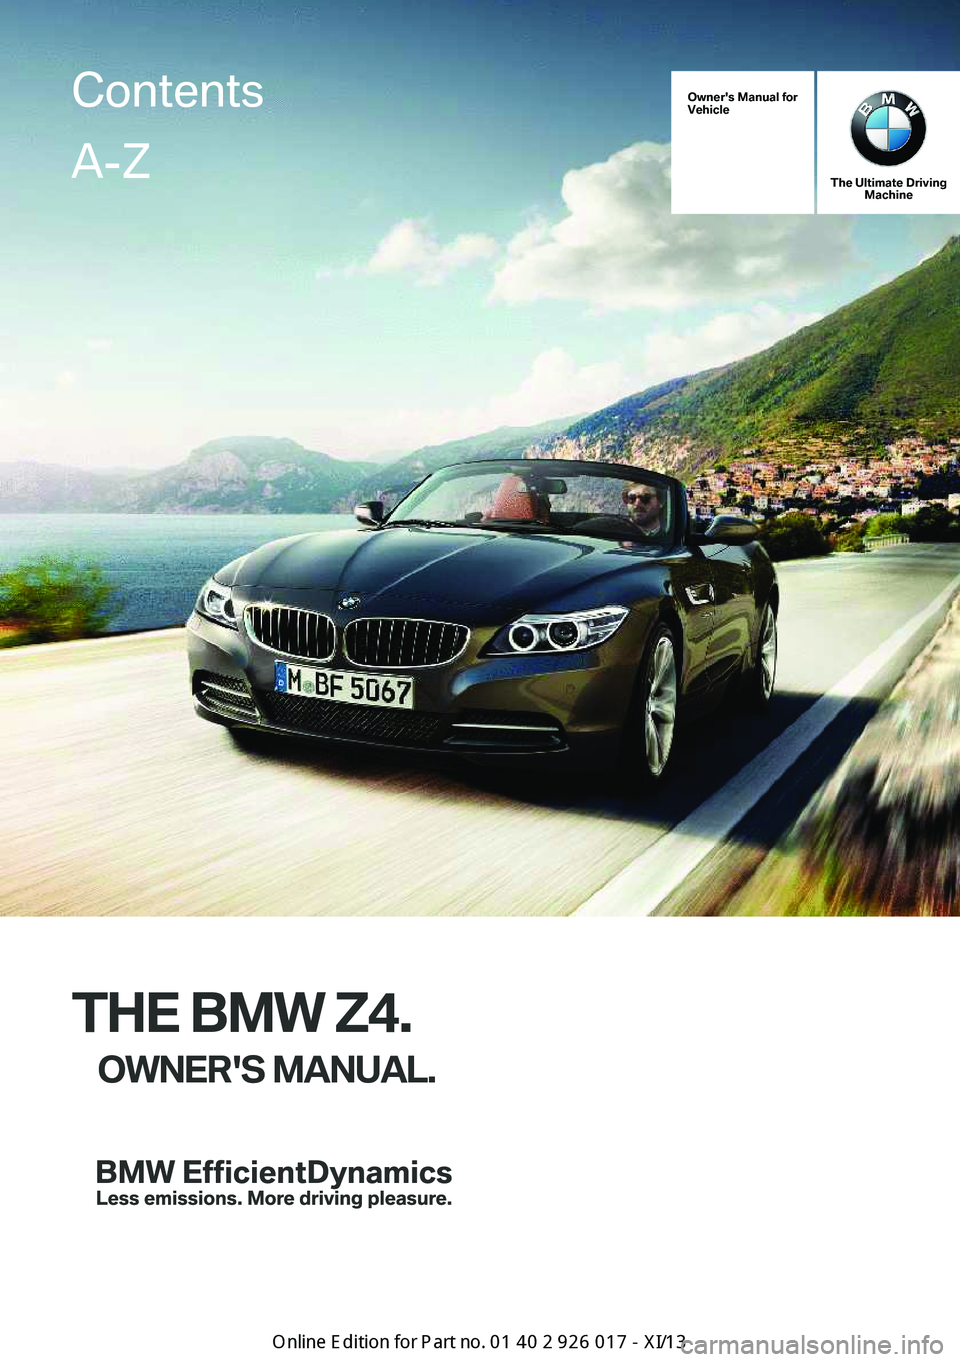 BMW Z4 2013 E89 Owners Manual Owner's Manual for
Vehicle
The Ultimate Driving Machine
THE BMW Z4.
OWNER'S MANUAL.
ContentsA-Z
Online Edition for Part no. 01 40 2 911 315 - VI/13   